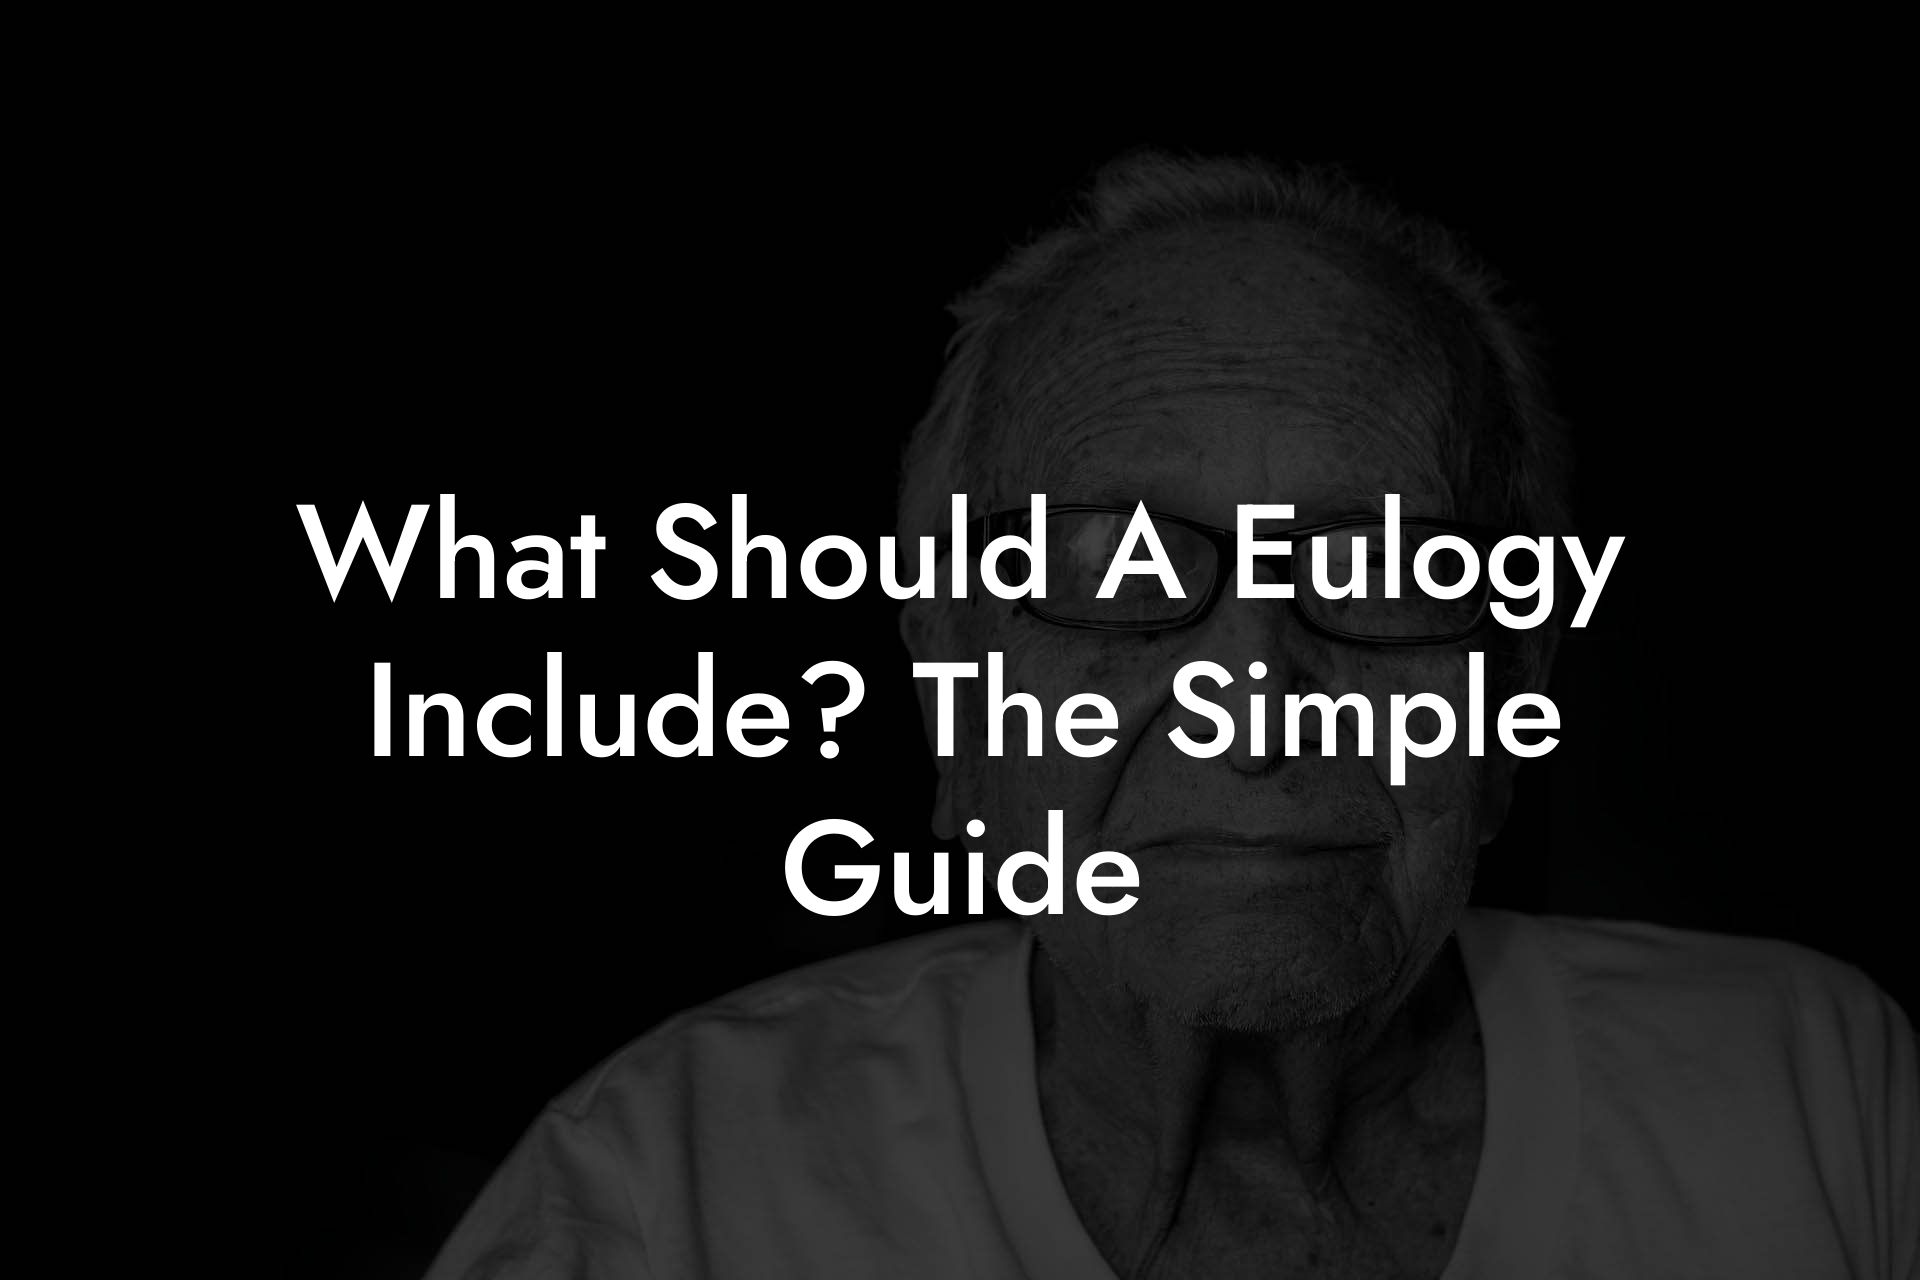 What Should A Eulogy Include? The Simple Guide